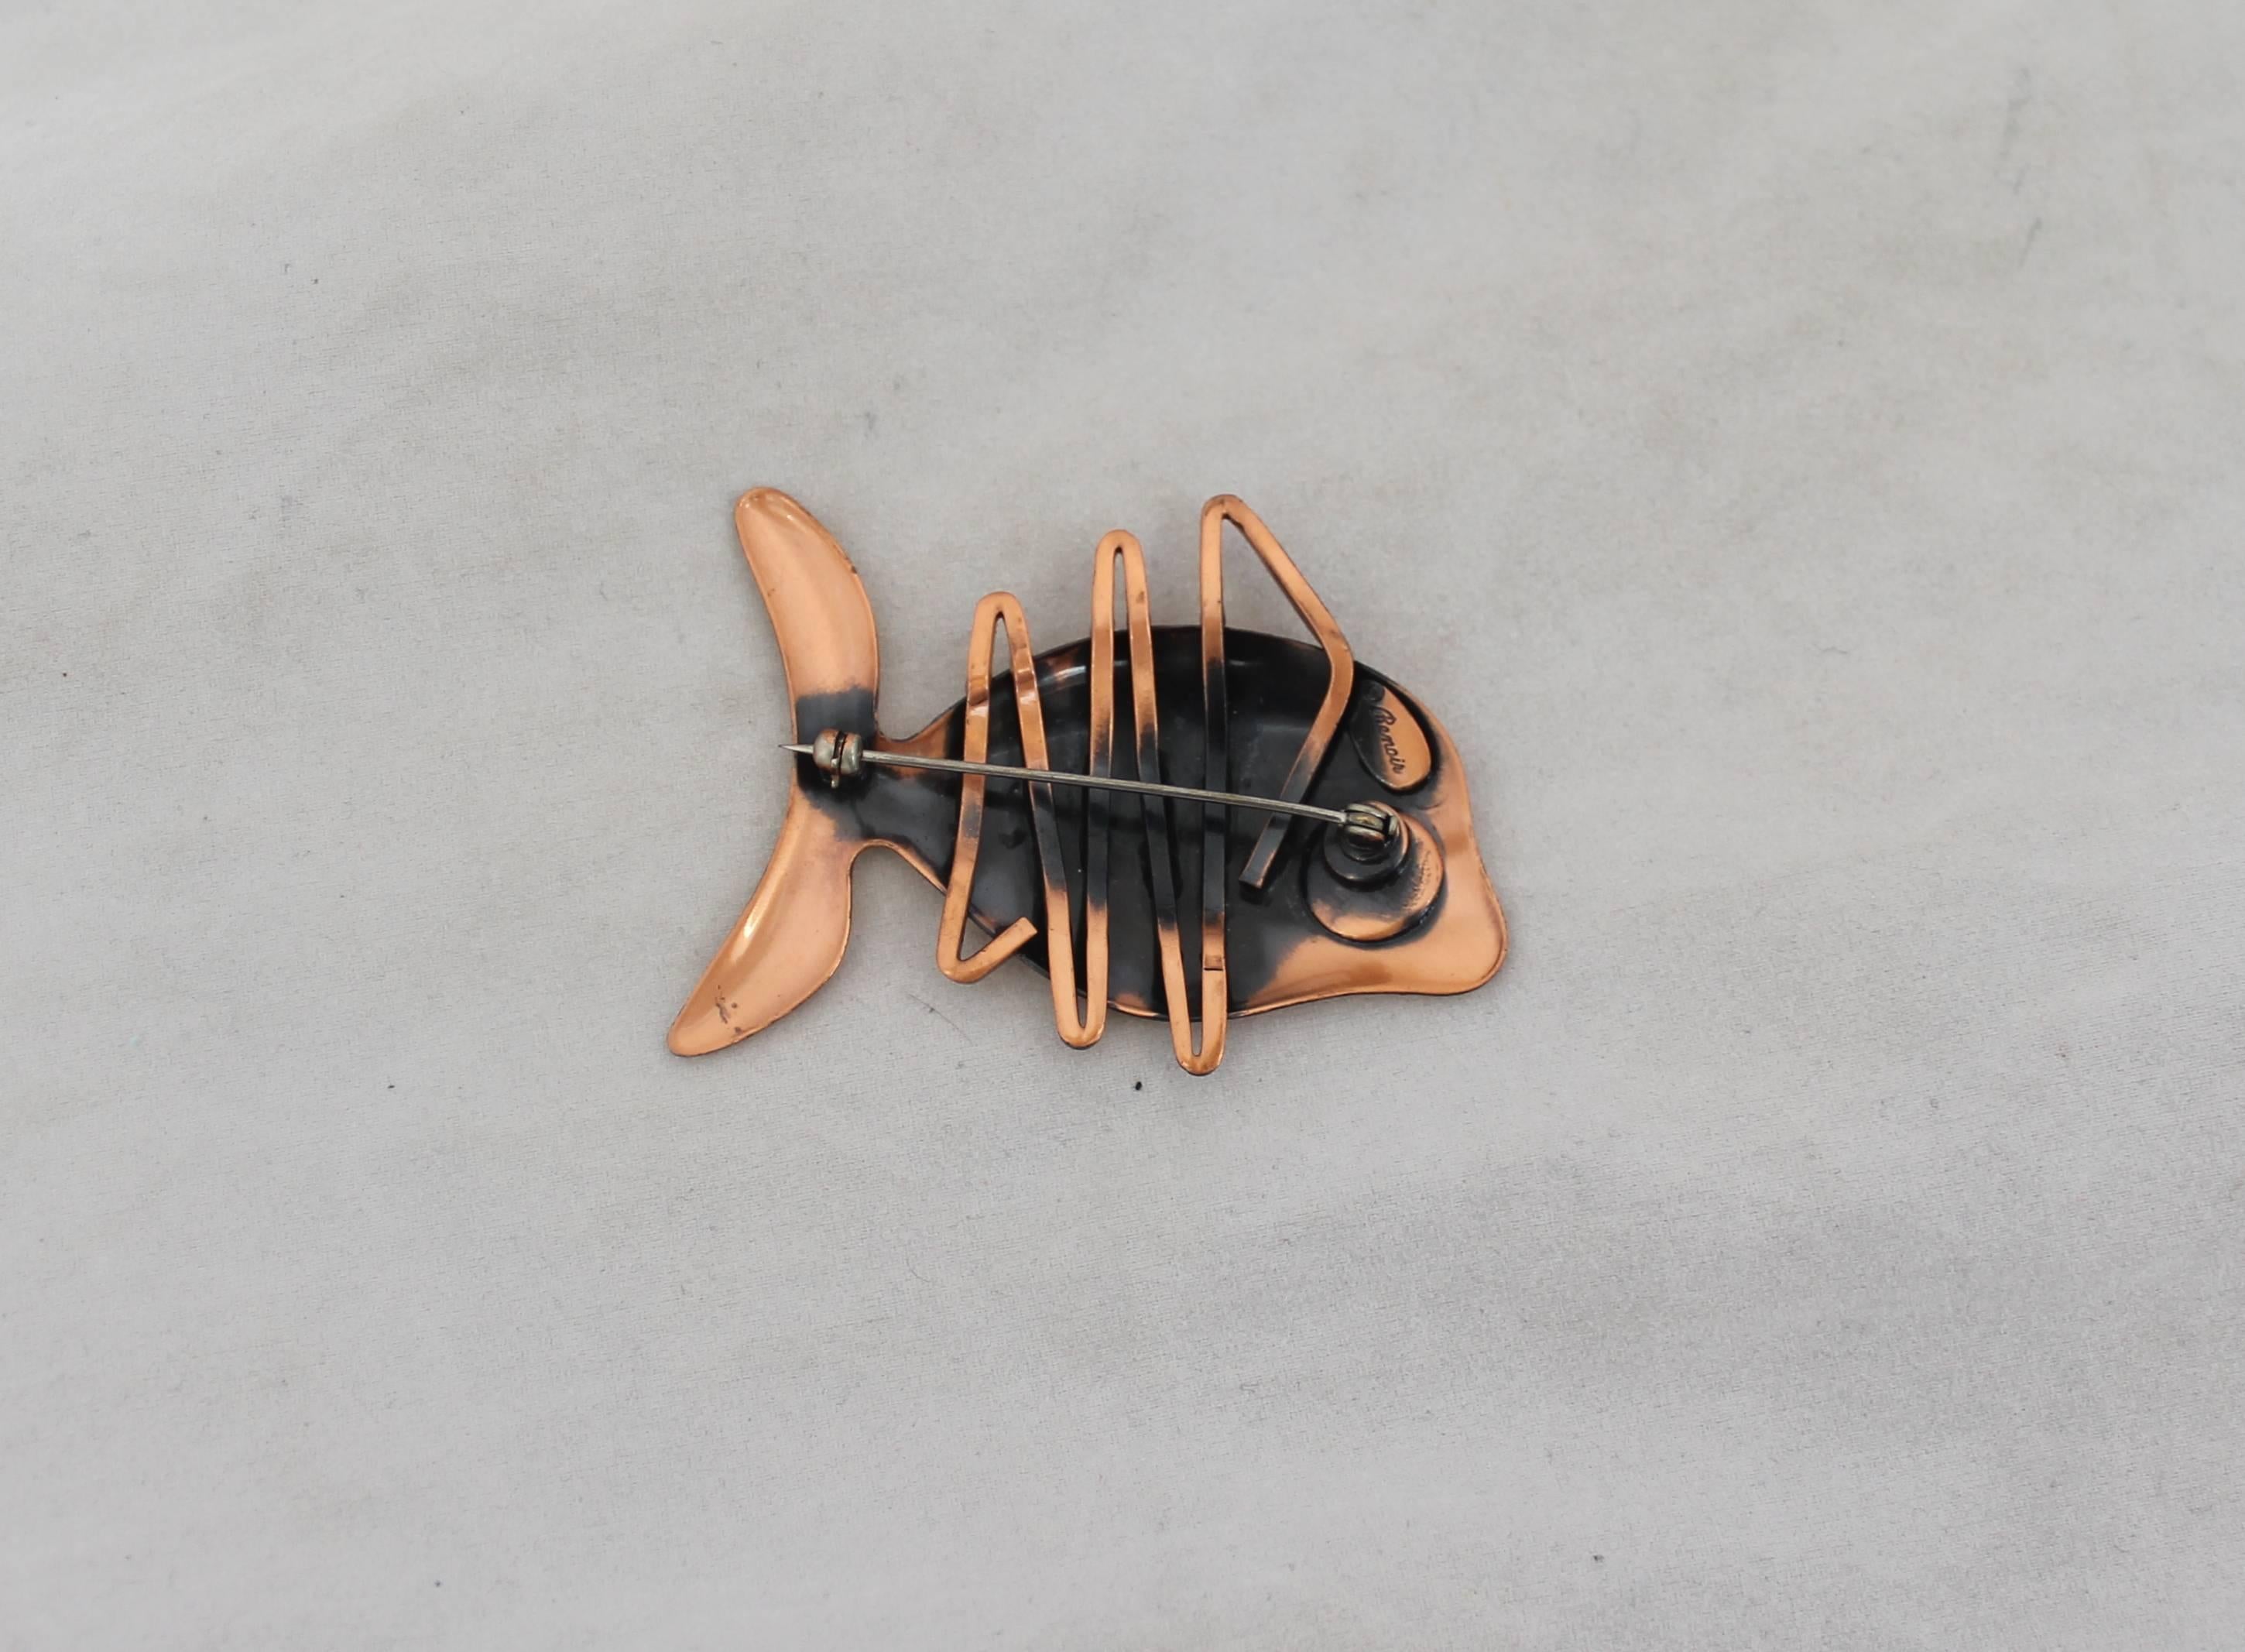 Renoir Vintage Copper Coral Fish Pin - 1950's.  This adorable vintage pin is in excellent vintage condition.  It features a coral fish shape, the Renoir signature, and it is composed of a shiny copper.

Measurements:
Length (at longest point):